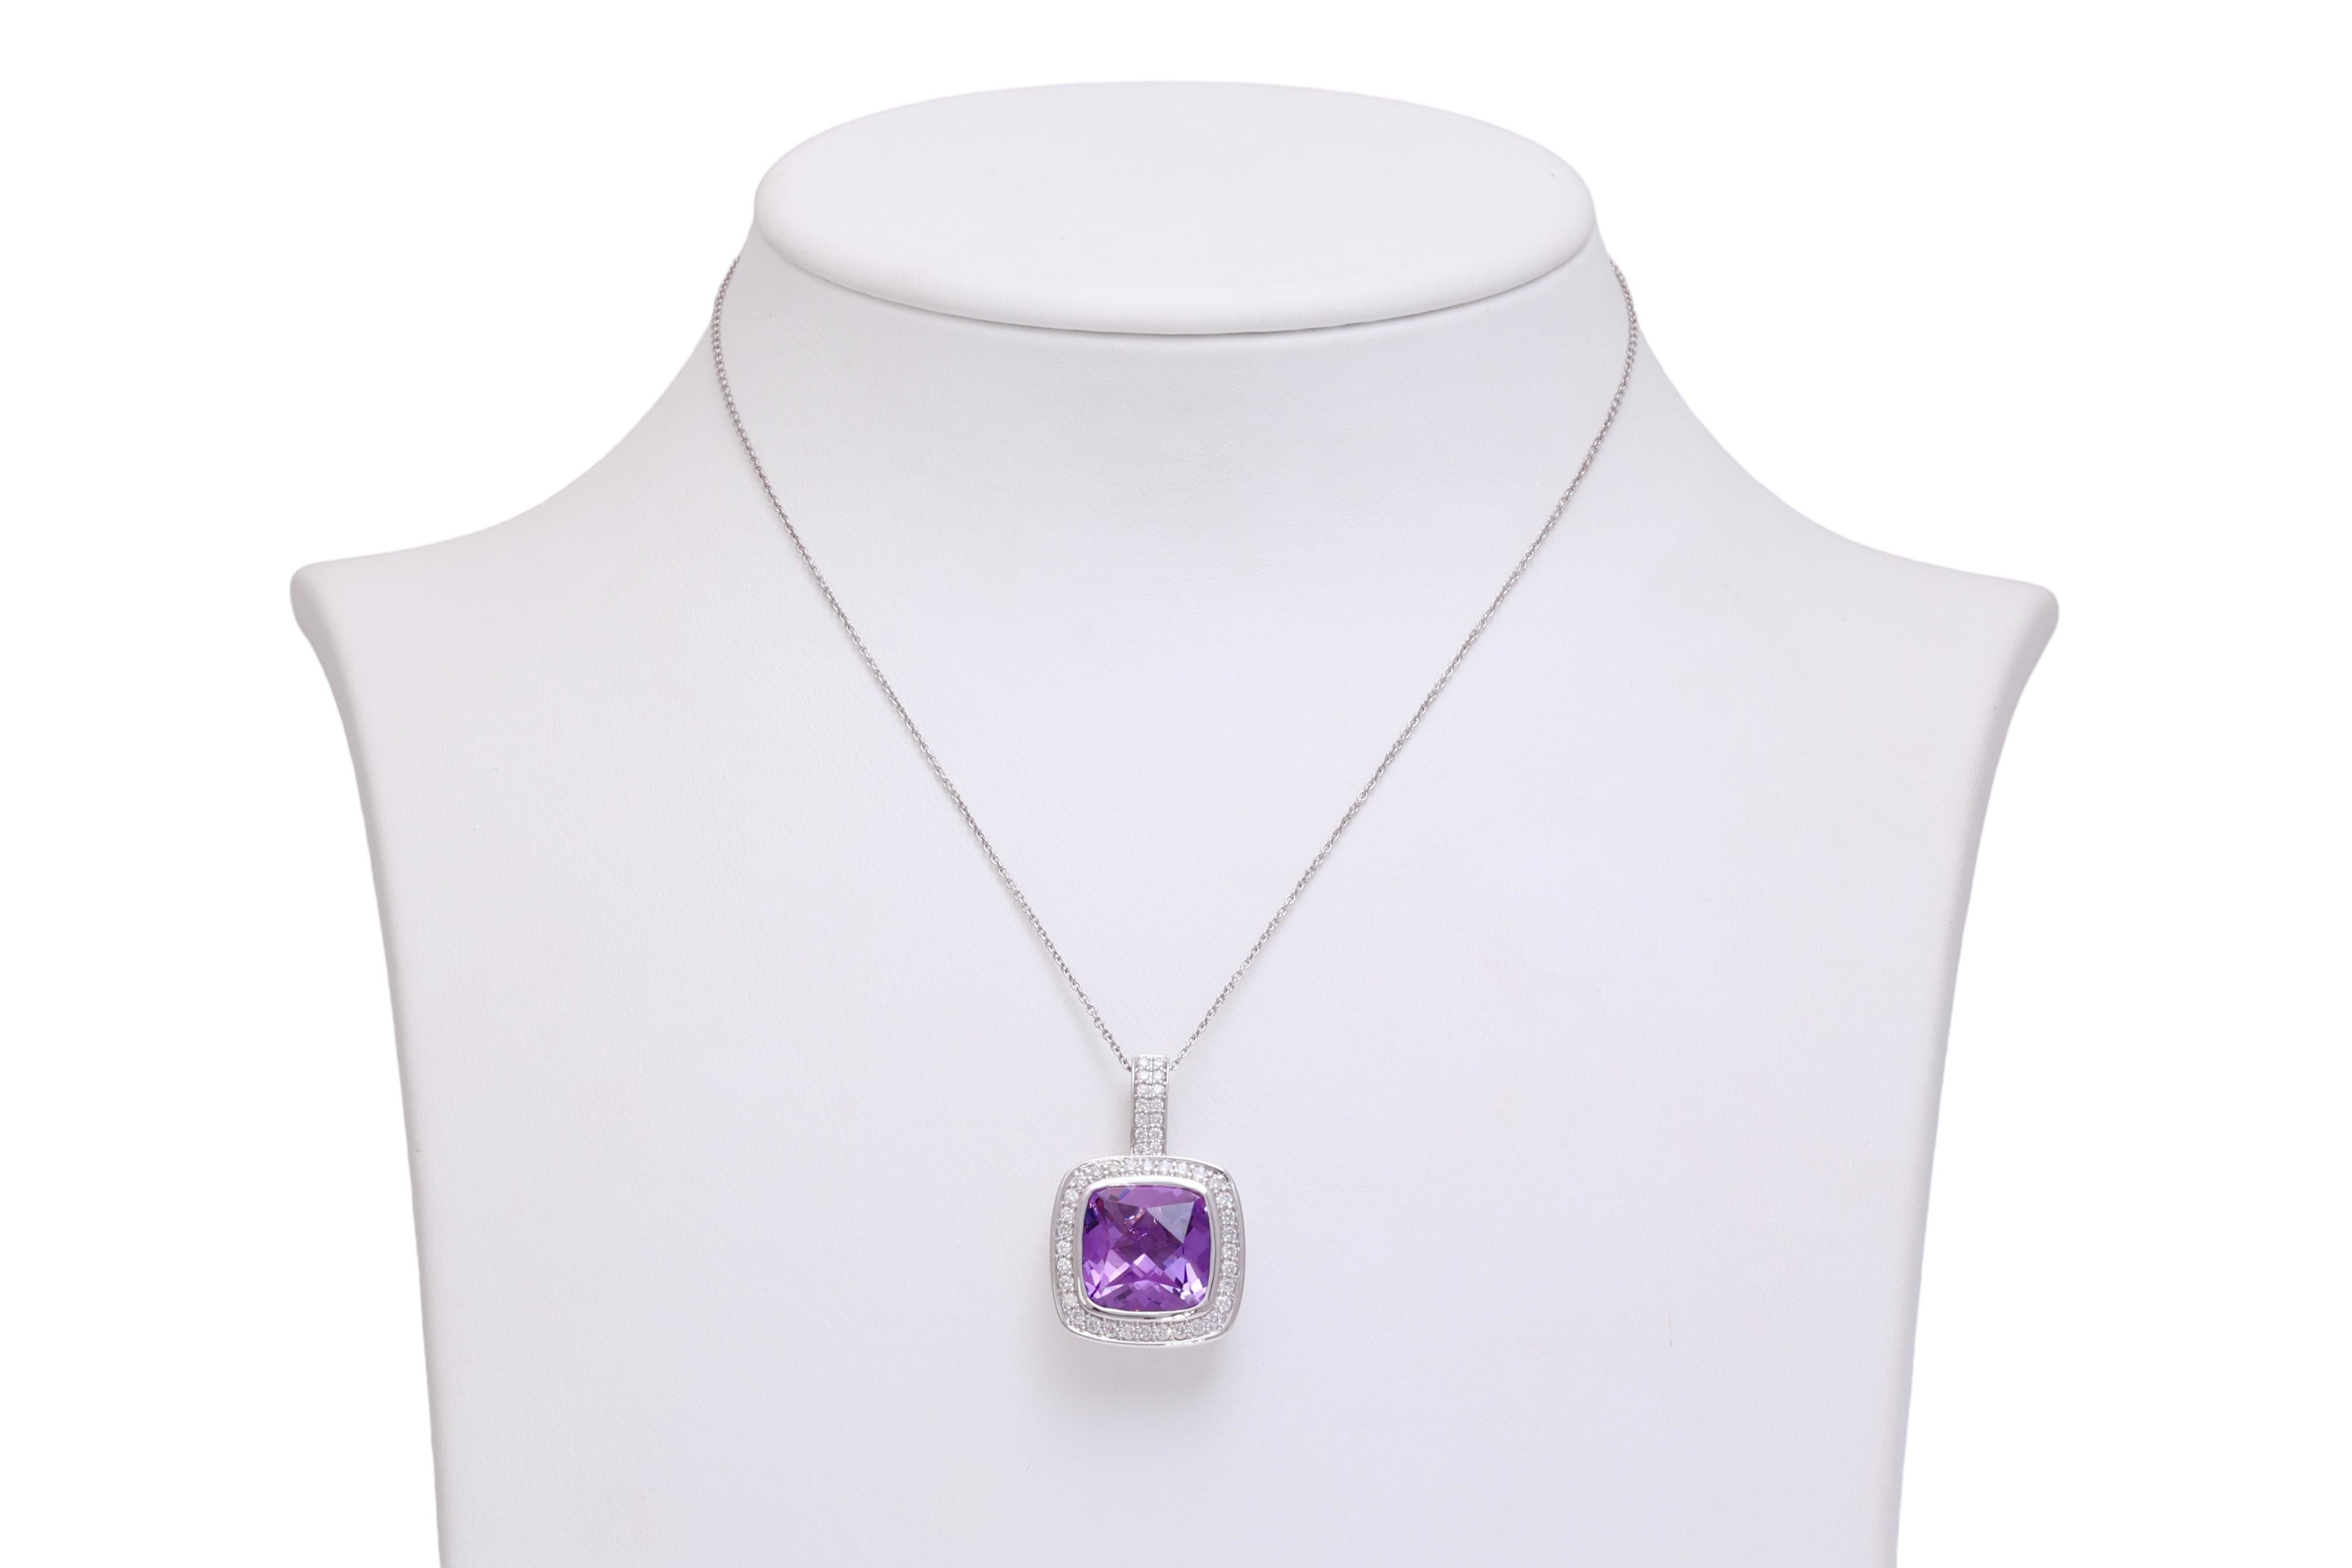 Magnificant 18 kt. White Gold Set Necklace, Earrings, Ring With Amethyst & Diamonds 

Necklace:
Diamonds: Brilliant cut diamonds, together 0.57 ct.
Amethyst: purple amethyst stone of  6 ct.
Material: 18 kt white gold
Measurements: Pendant: 17.7 mm x